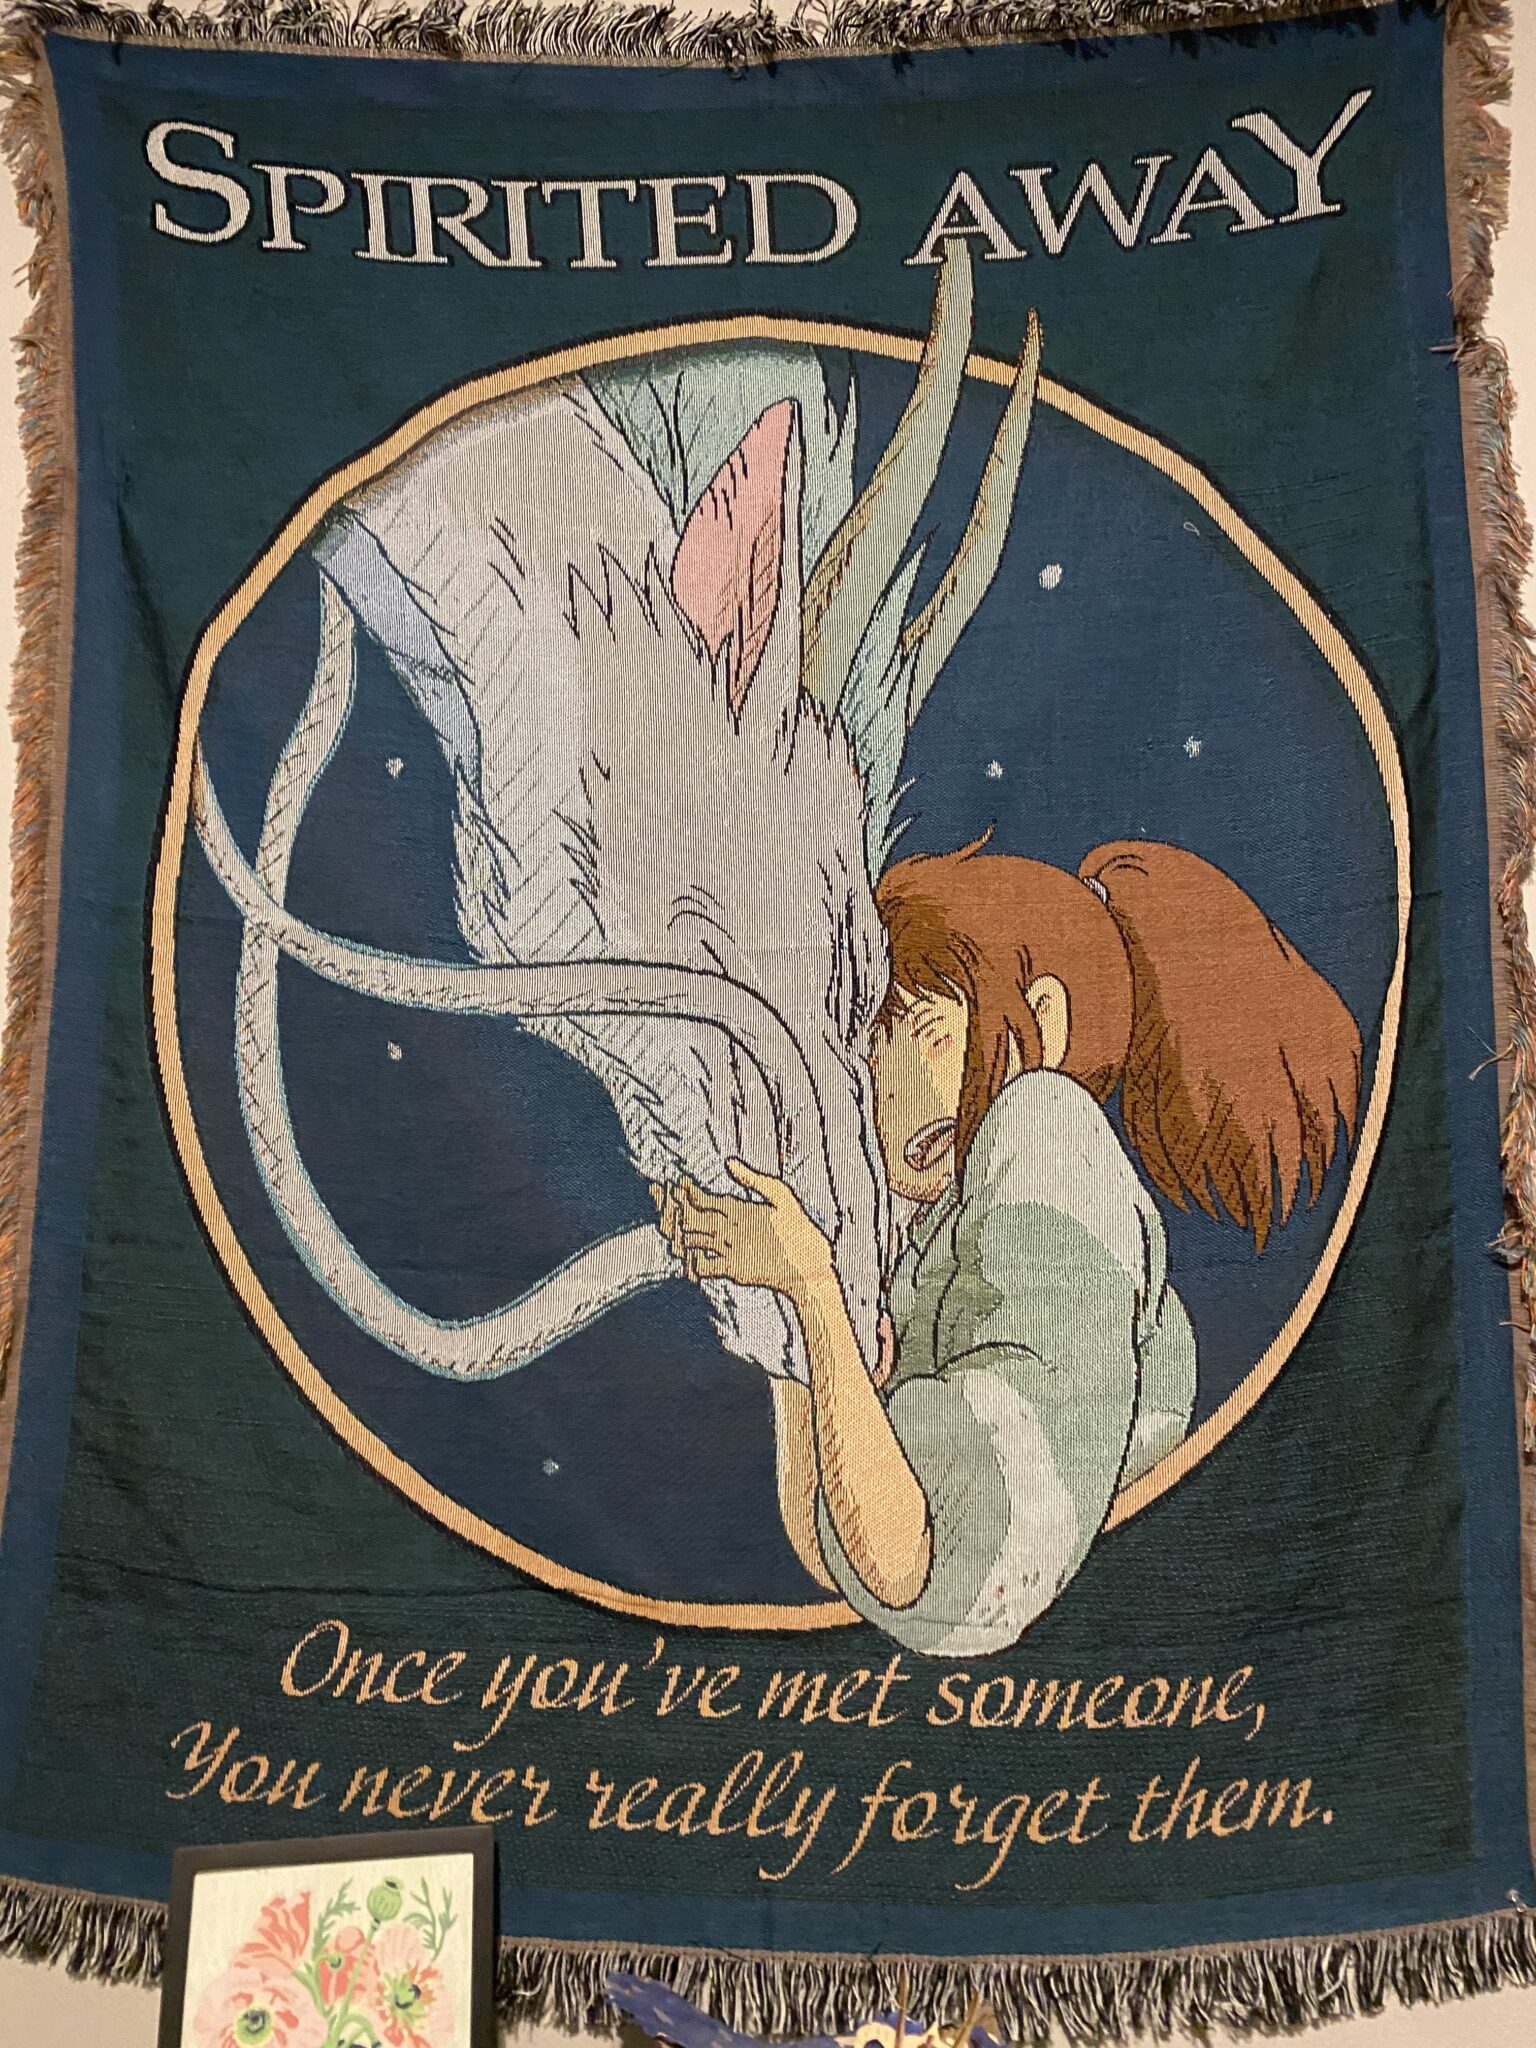 Chihiro hugging Haku in spirited away above the words "Once you've met someone, you never really forget them."